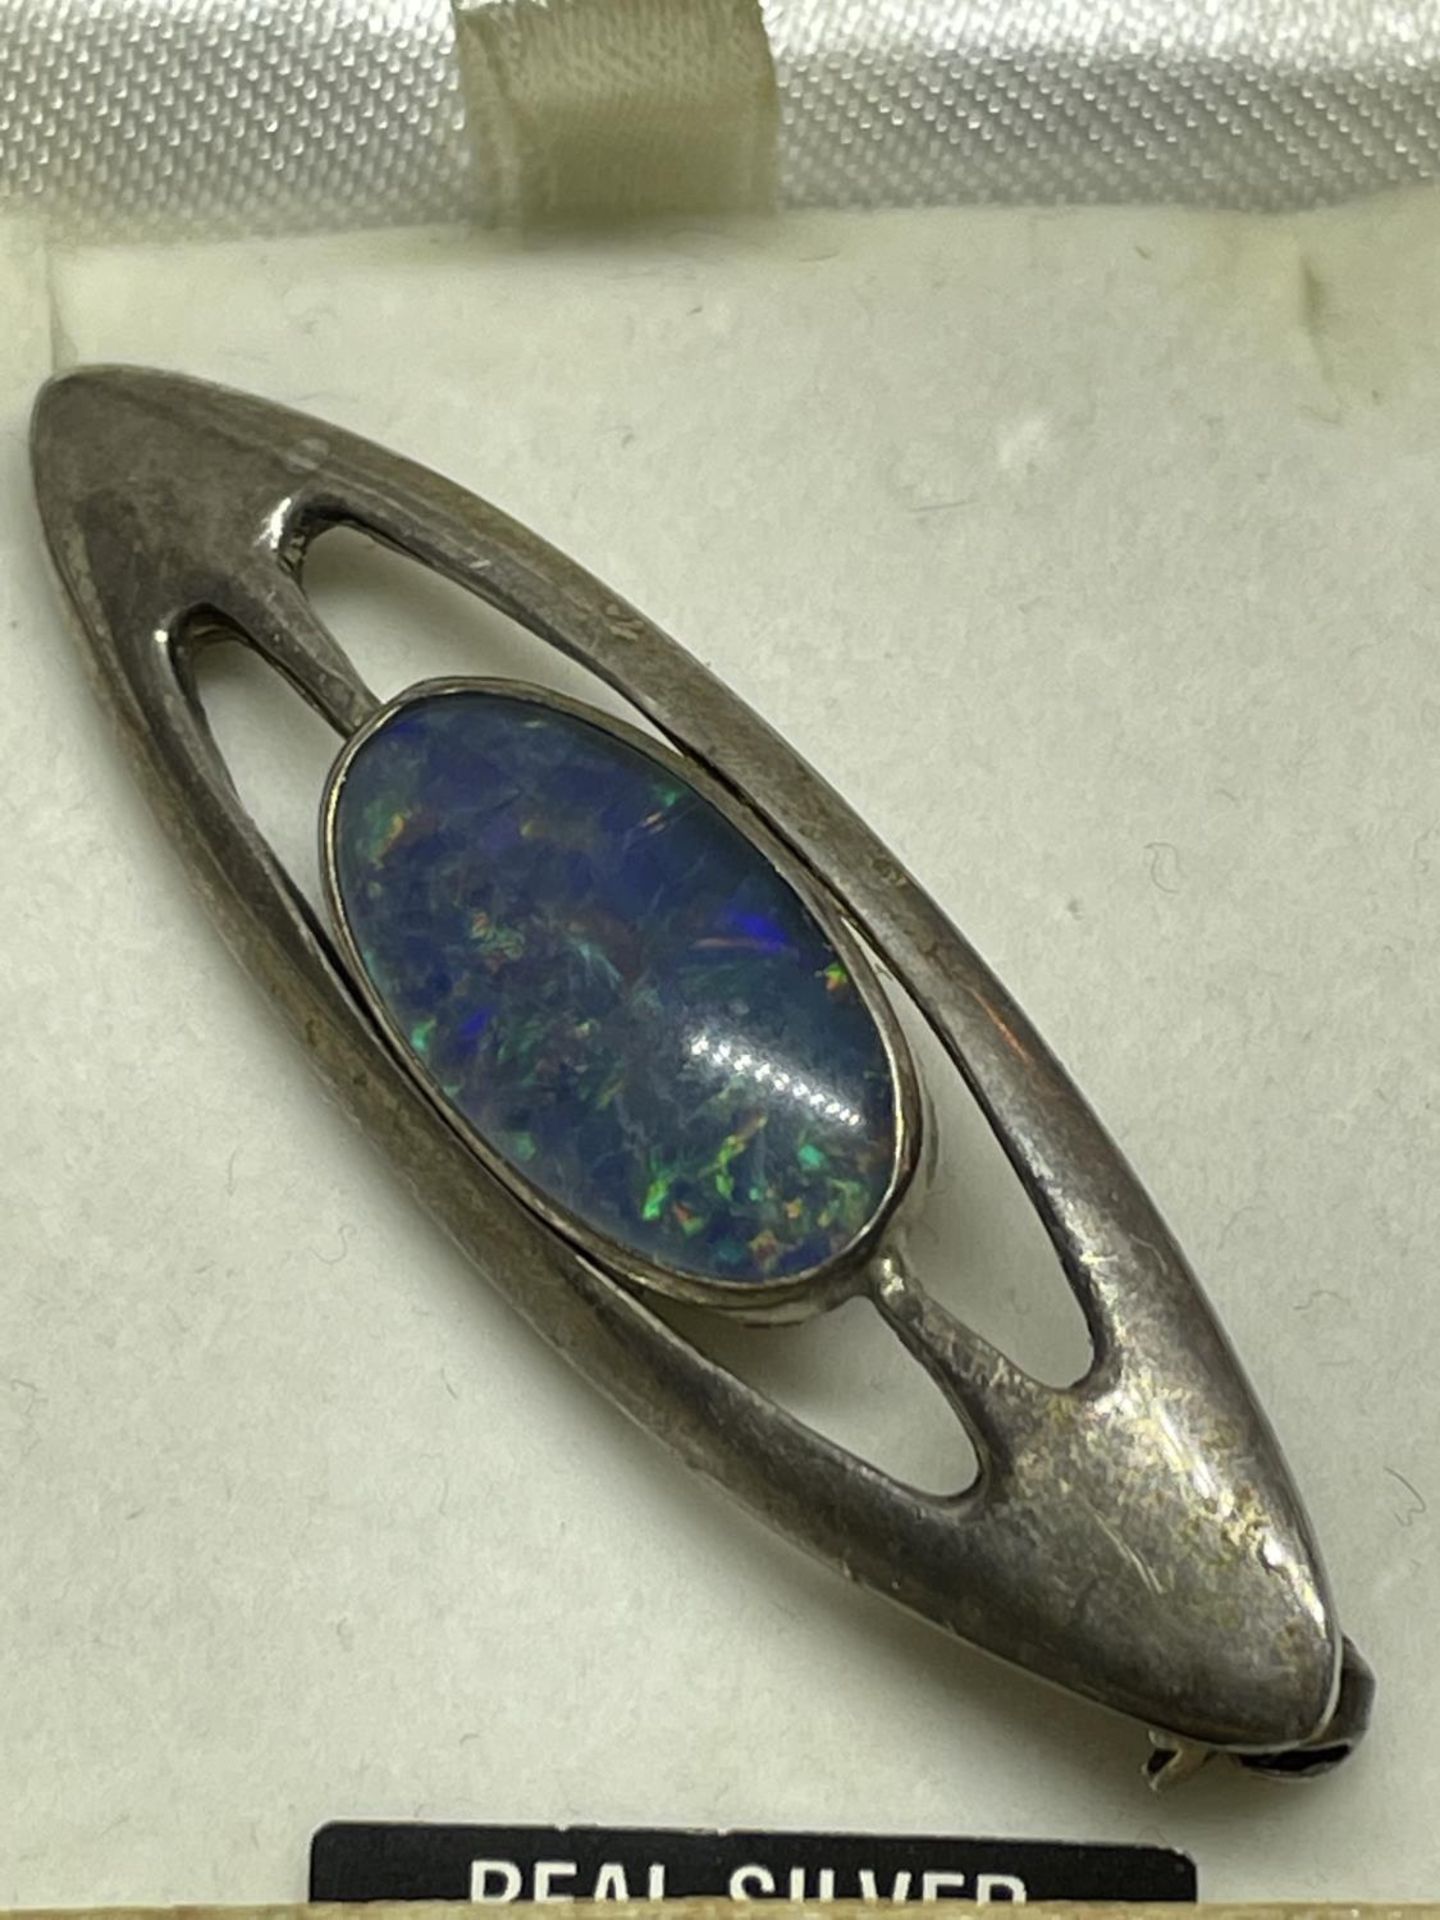 A SILVER BROOCH IN A PRESENTATION BOX - Image 2 of 2